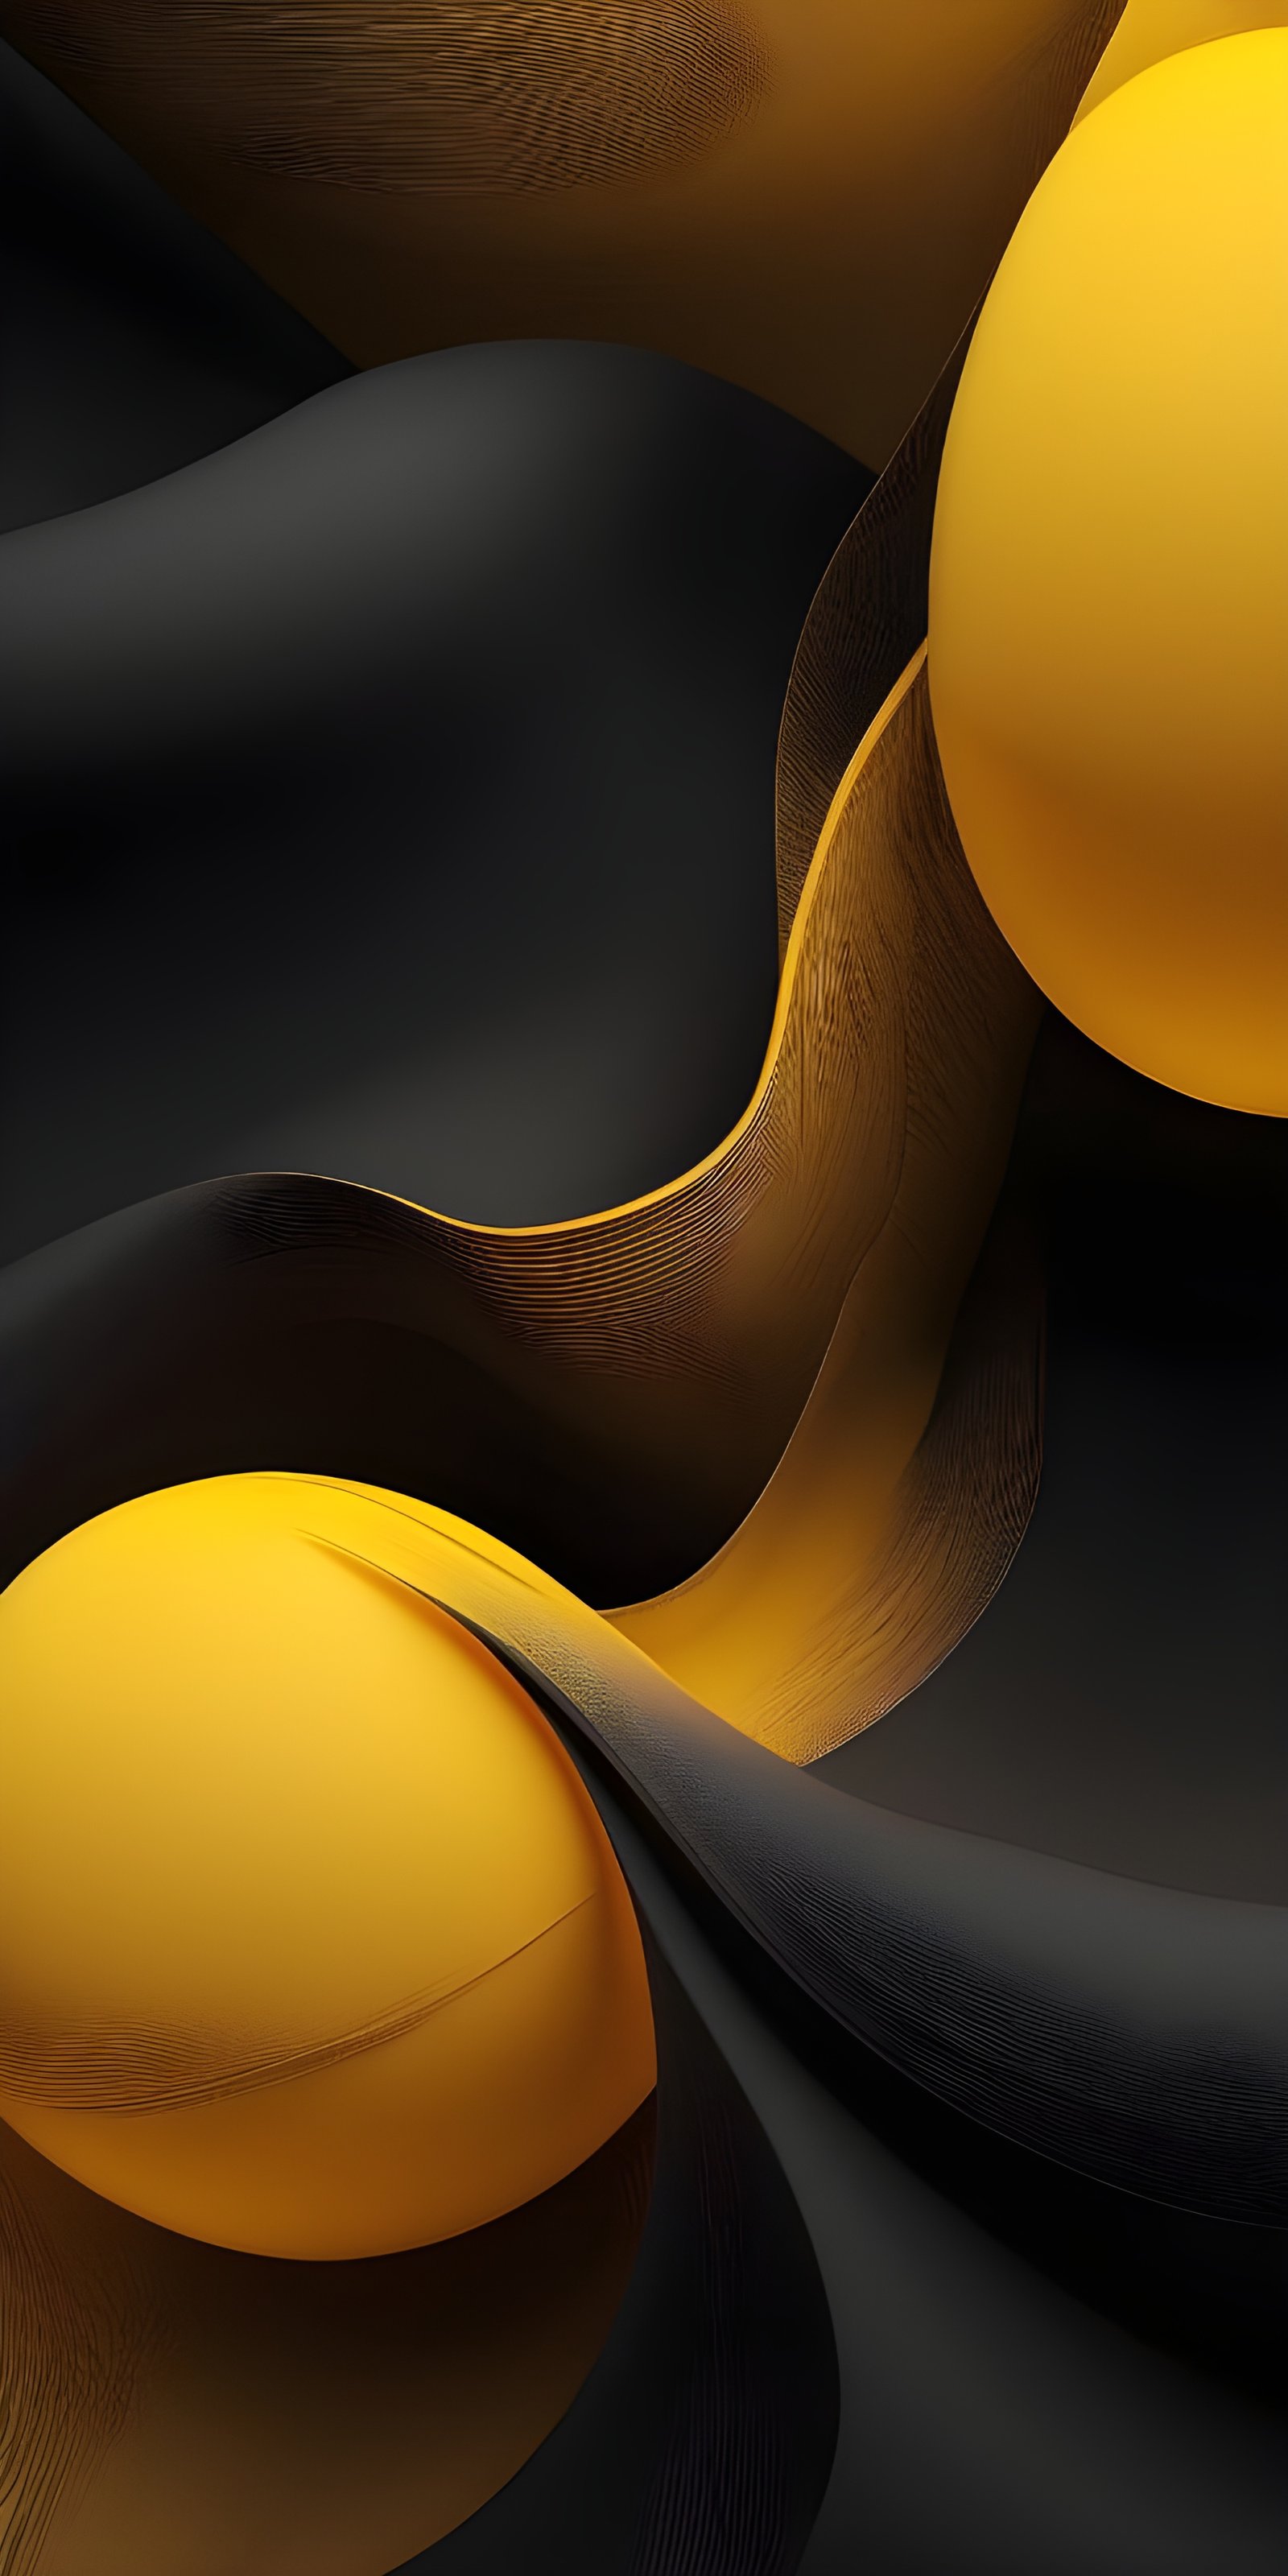 Yellow and Black Abstract Phone Wallpaper Download foe Phone